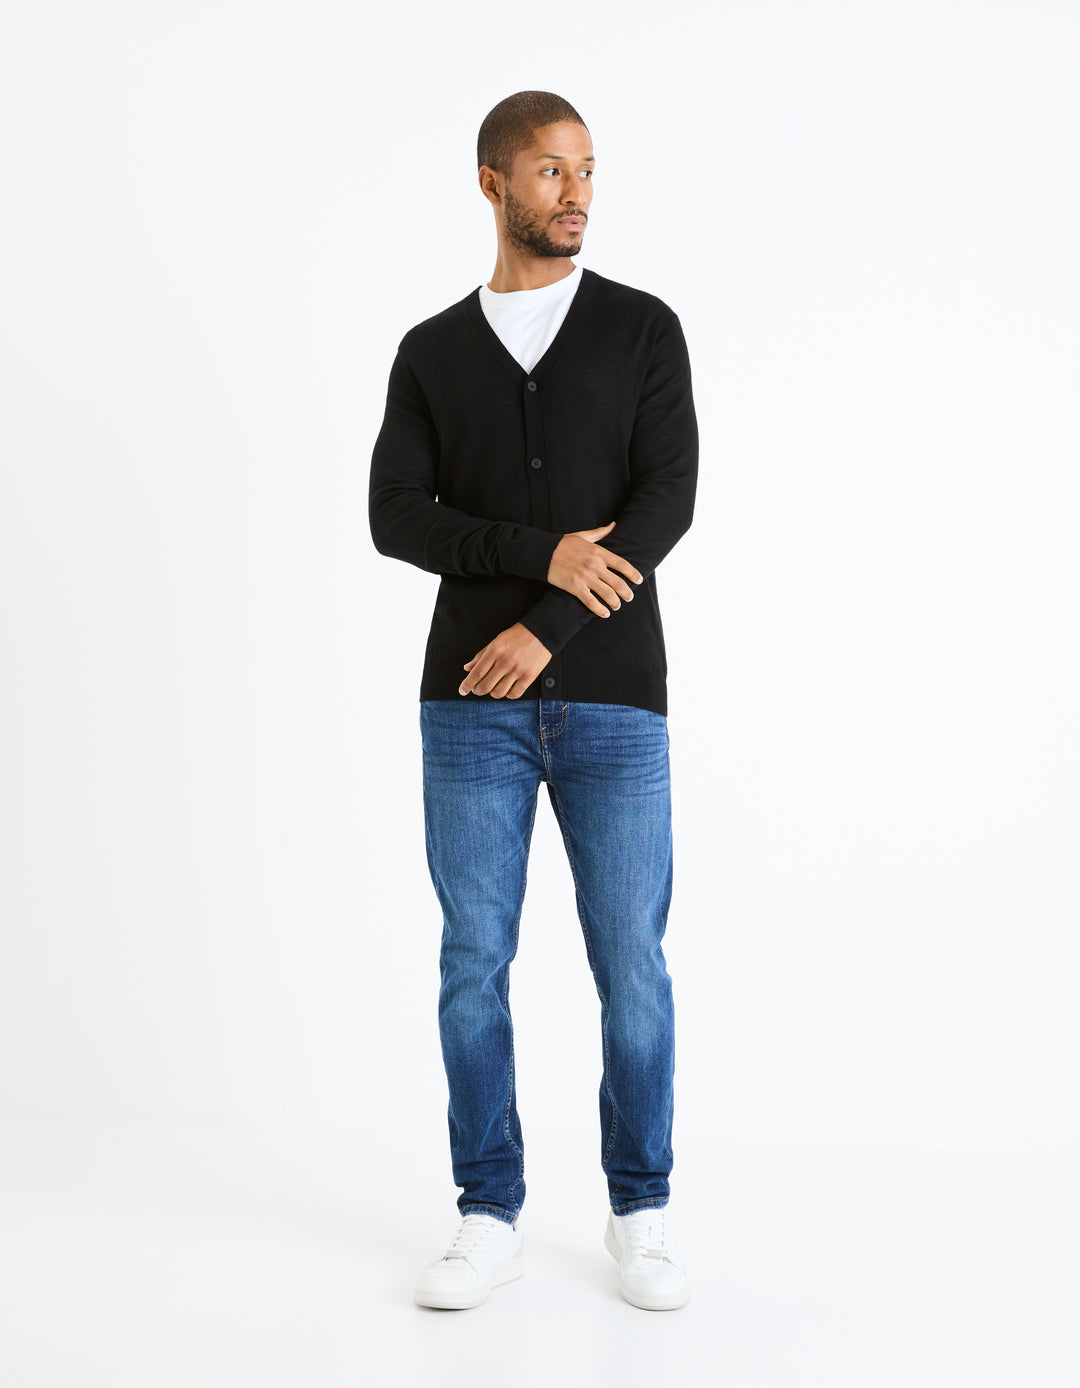 Men - Knitted - Sweater - Long sleeves